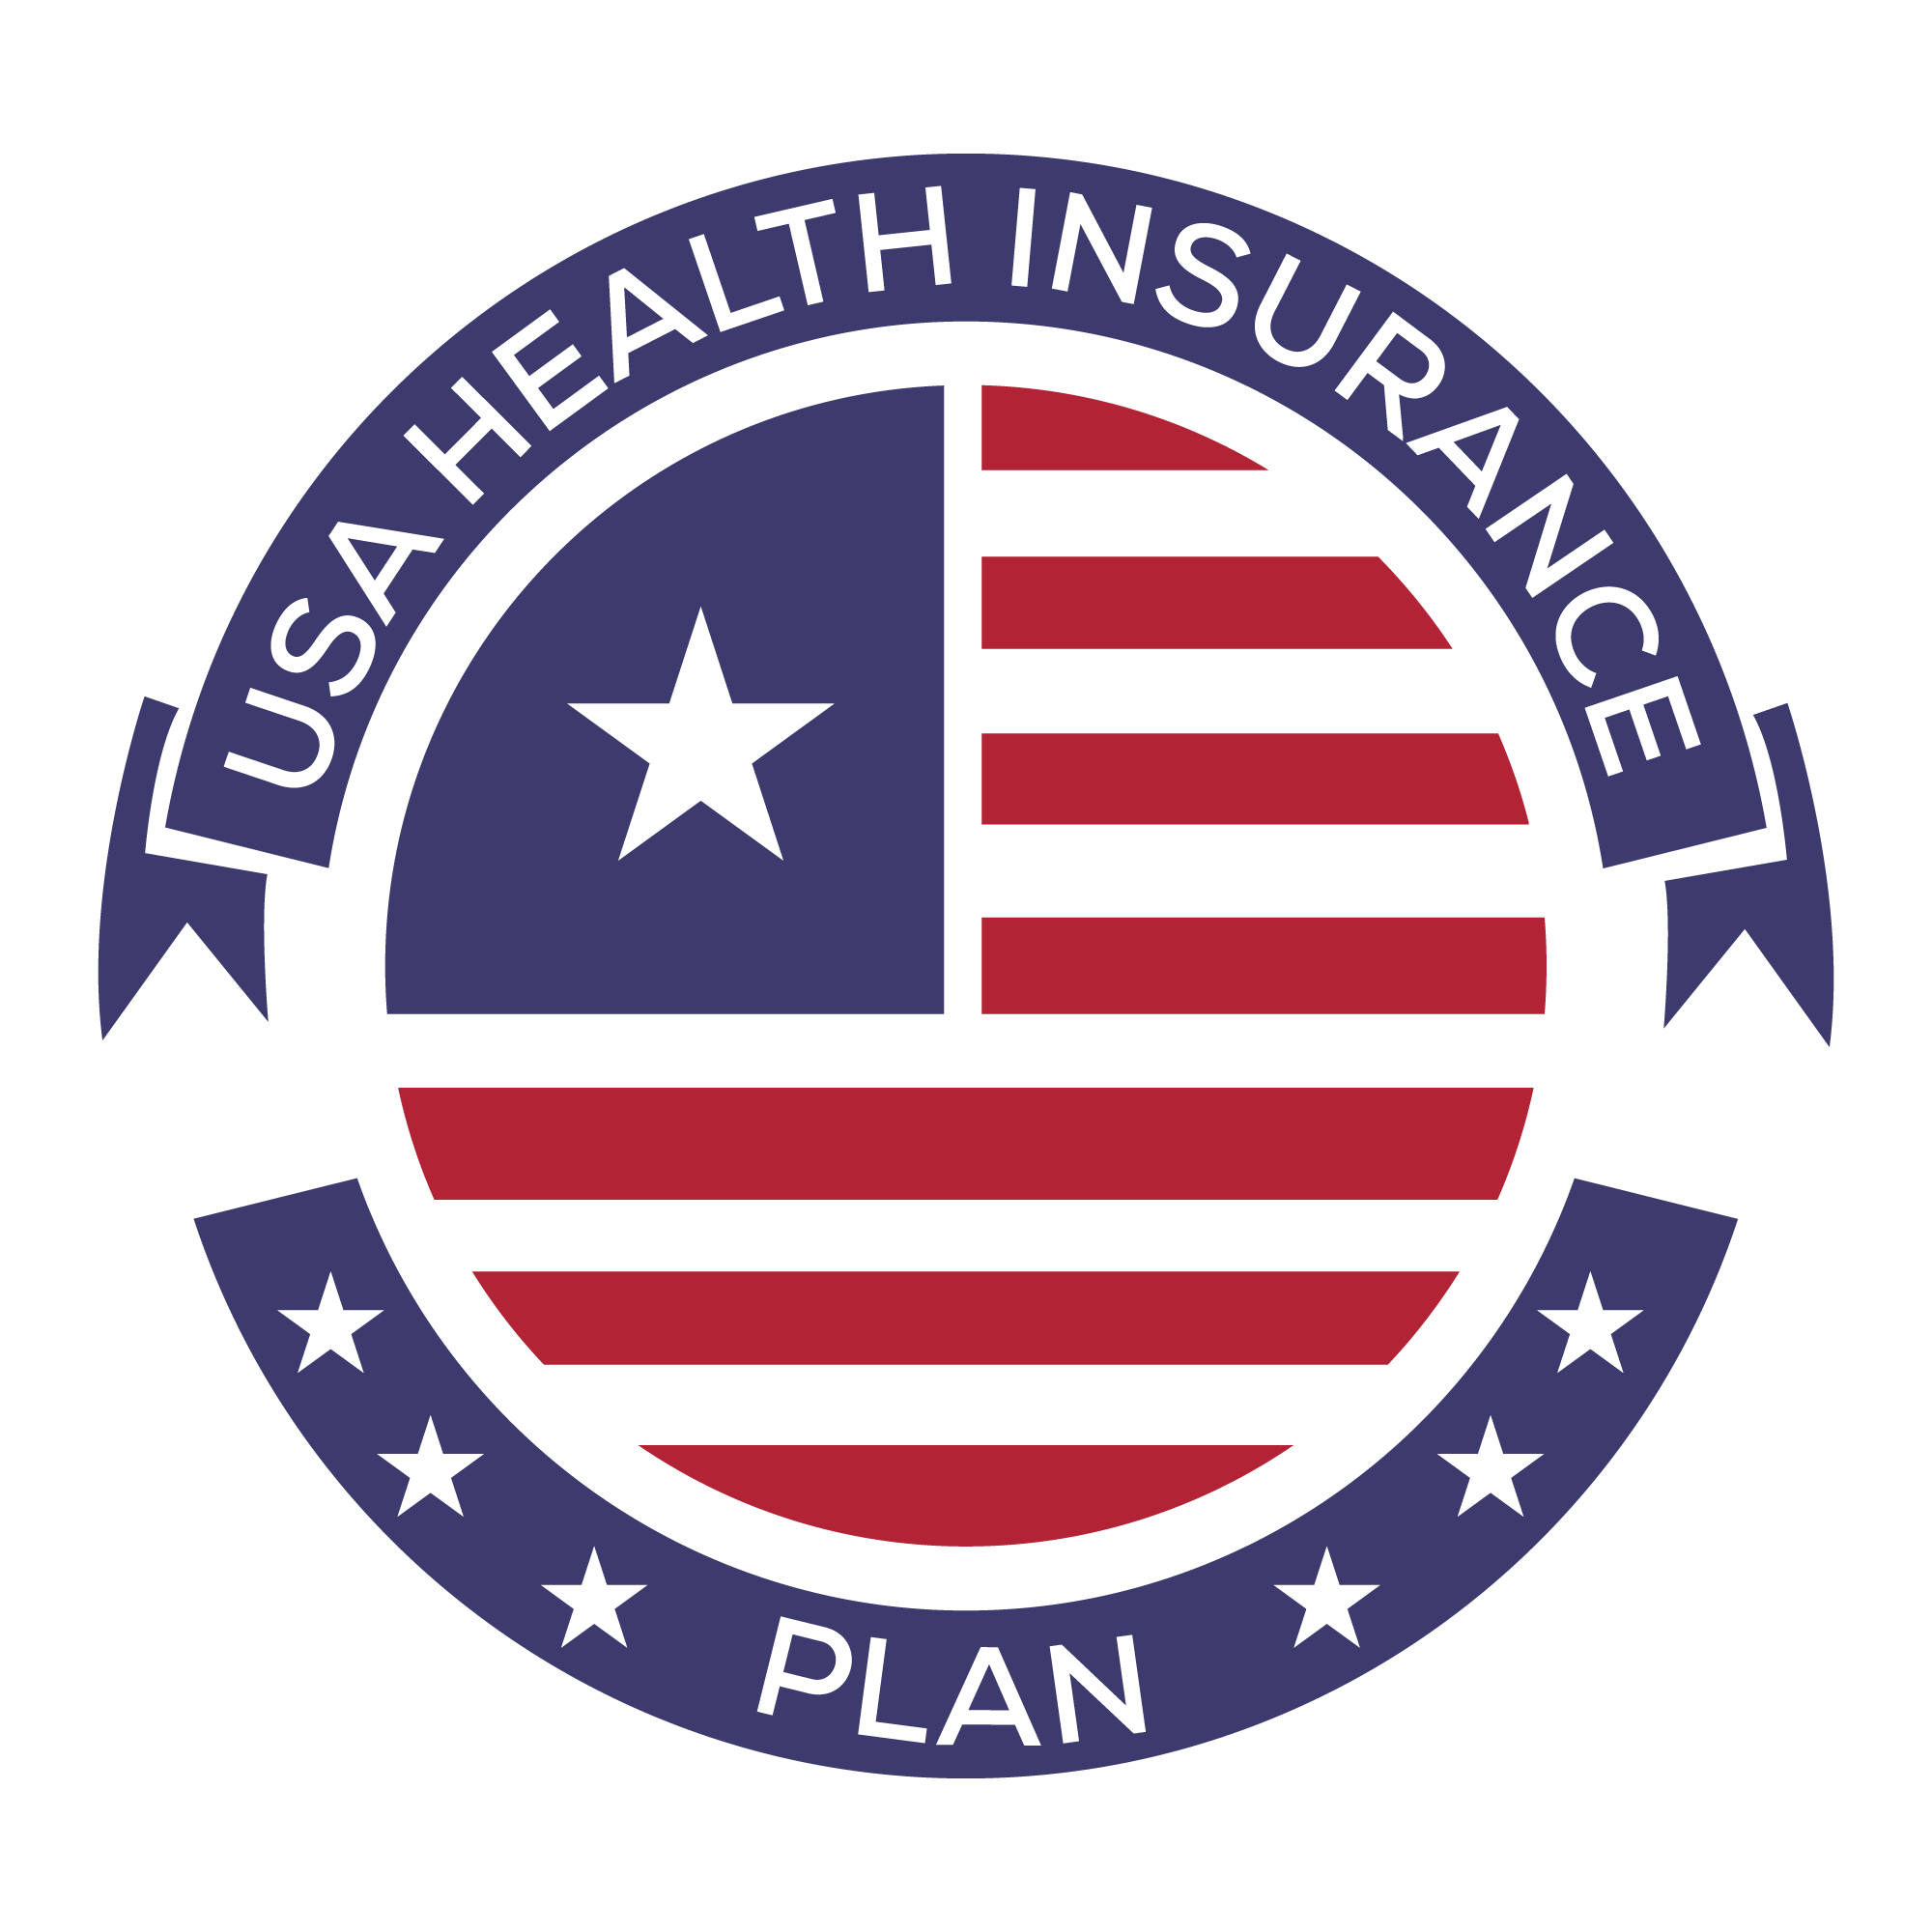 Professional & Courteous! USA Health Insurance Plan was excellent to deliver varied insurance options for myself and my spouse. Chris took the extra time to ensure we were properly matched in the marketplace. I would definitely recommend USA Health Insurance Plan to my colleagues and friends. Chris was professional, courteous and personable to meet our individual needs. Get information on health insurance, including Medicaid, Medicare, and find help paying for medical bills.  You've financed your own company's growth through years of dedication and effort; what can you say about yourself? You're a self-reliant hard worker, who resists being told how to live your life. And now it's time to ensure that your prized possession is protected - from unexpected expensive medical bills. Health insurance is a financial agreement guaranteeing the health insurance company will cover the cost of your medical expenses so that you and your business don't have to. Health Information from the Government Learn about the coronavirus pandemic and how to get the COVID-19 vaccine. Use the Medline Plus search tool to answer your medical questions, find information for seniors, visit sites covering issues like Alzheimer’s, vaccines, and rare diseases, discover caregiver support resources. Most small business owners overpay on both monthly premiums and in out of pocket expenses on their current health insurance. USA Health Insurance Plans significantly reduce the cost of self employed health insurance plans. We match you to the right agent, the right carrier, and the right network to make sure not only that you and your business save money but so that you have protection you can rely on for decades to come.  Quick Approval! USA Health Insurance Plan was a blessing for all matters health insurance. Michelle is knowledgeable and communicative. I didn't know where to look for off market insurance. I got approved for a policy very quickly with her help. Highly recommended!  Helpful Information! USA Health Insurance Plan was amazing! Linda explained everything so thoroughly and made it all so simple. It was so easy to get signed up and I knew exactly what I was getting compared to other reps I had spoken to through different companies. I highly recommend her!